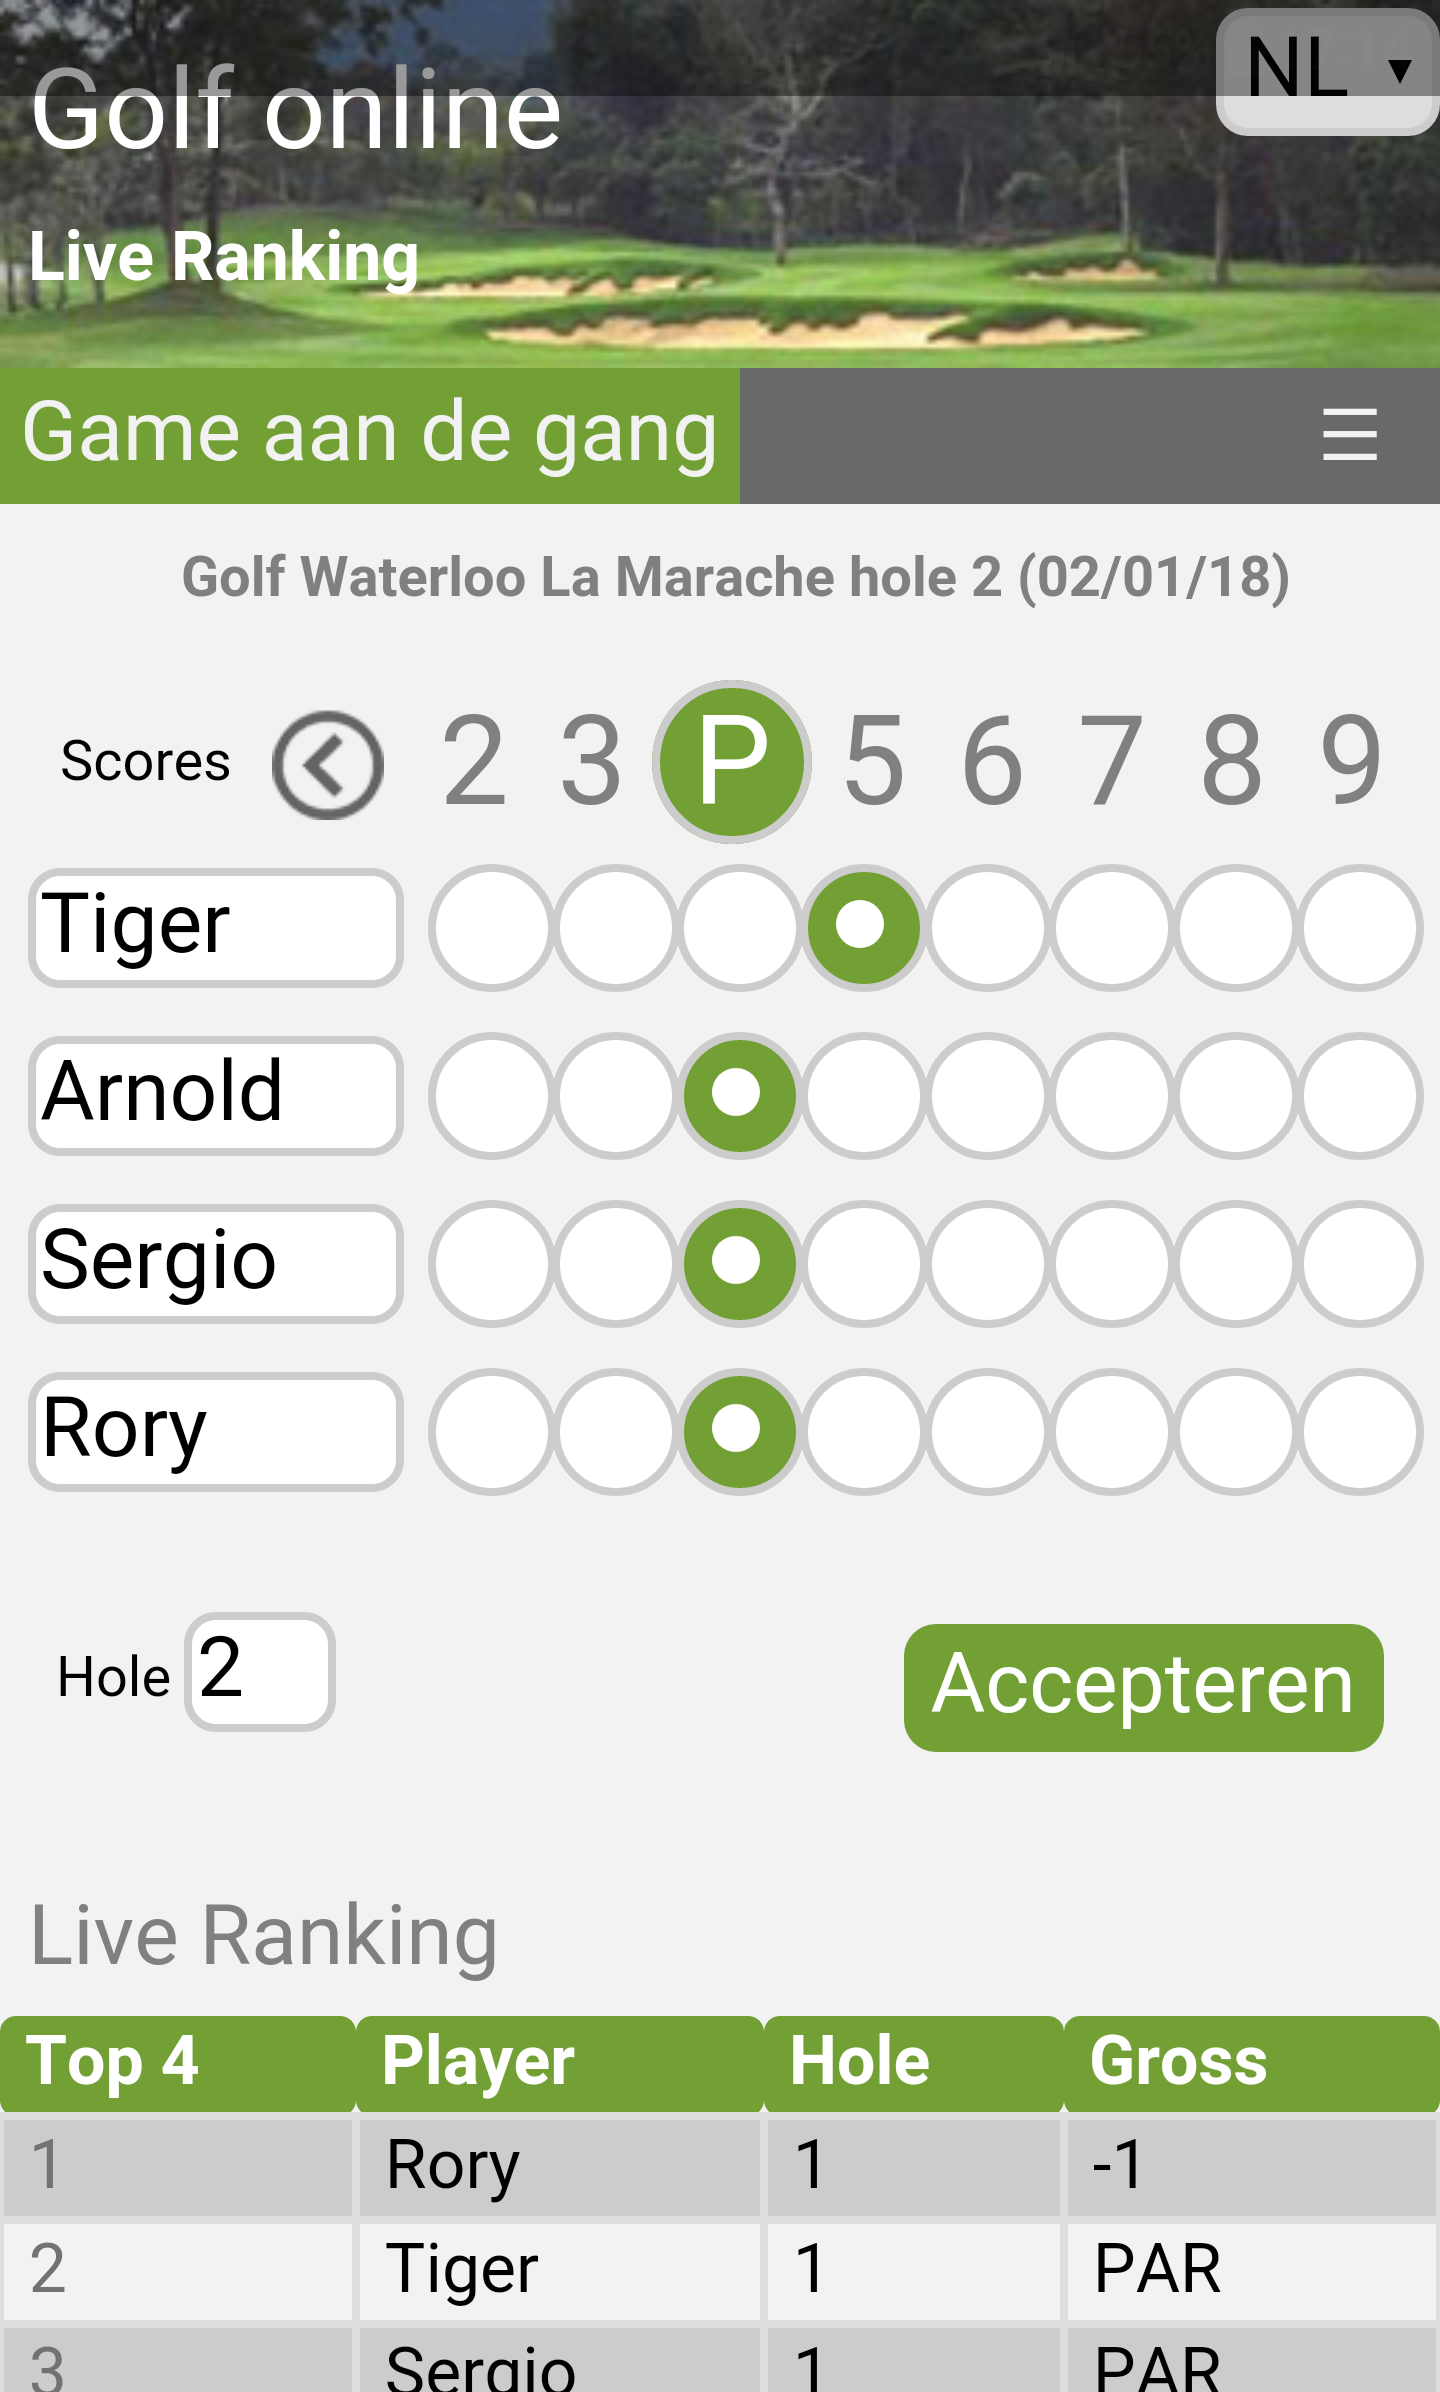 Live sharing my scores with the other golfers